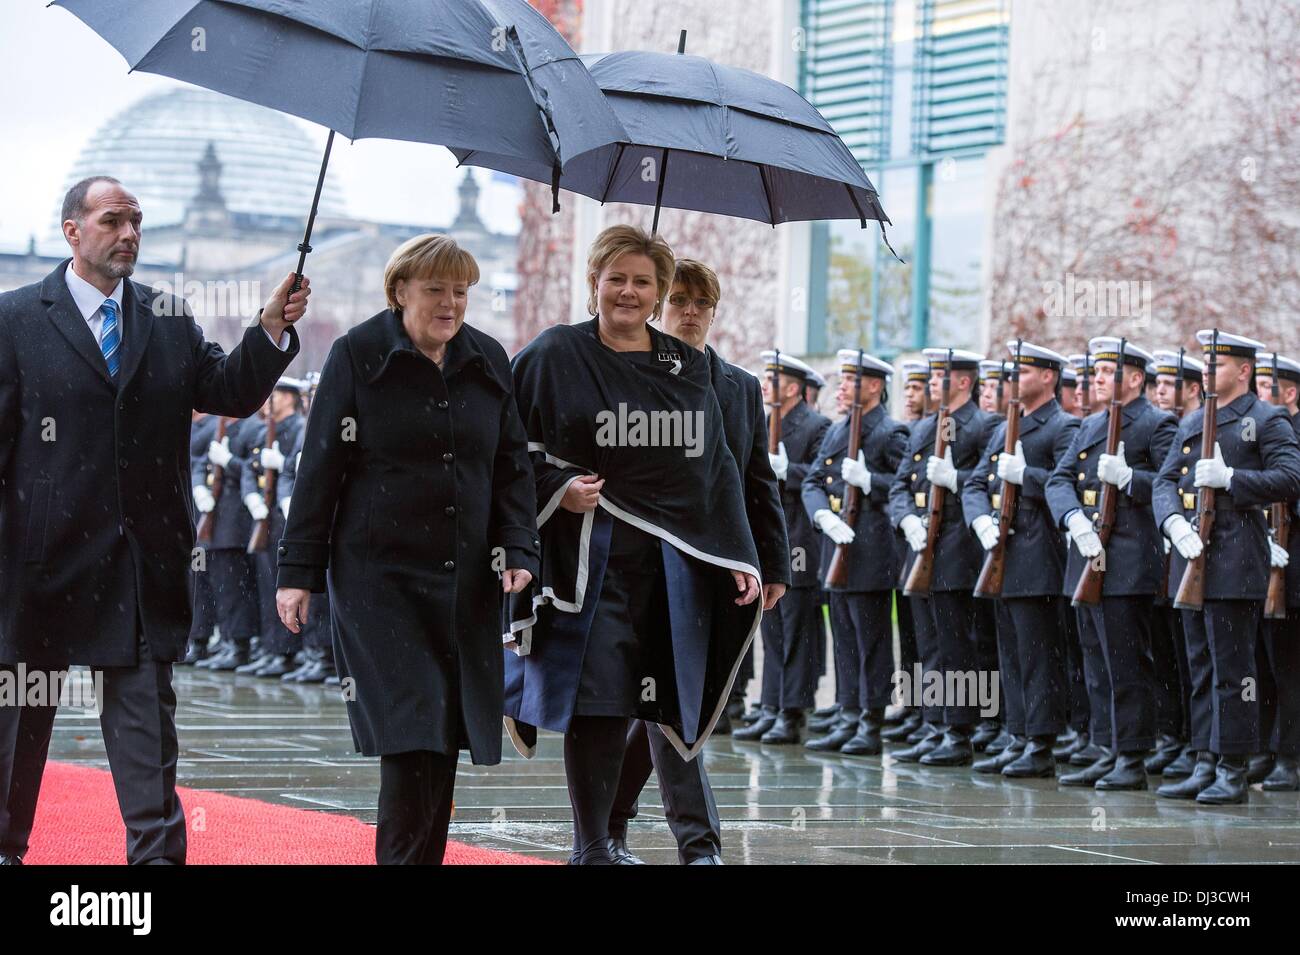 Berlin, Germany. 20th Nov, 2013. German Chancellor Angela Merkel give the welcomes to the Prime Minister of the Kingdom of Norway, Erna Solberg, with military honors in the Federal Chancellery, in Berlin, on November 20, 2013.Photo: Goncalo Silva/NurPhoto Credit:  Goncalo Silva/NurPhoto/ZUMAPRESS.com/Alamy Live News Stock Photo